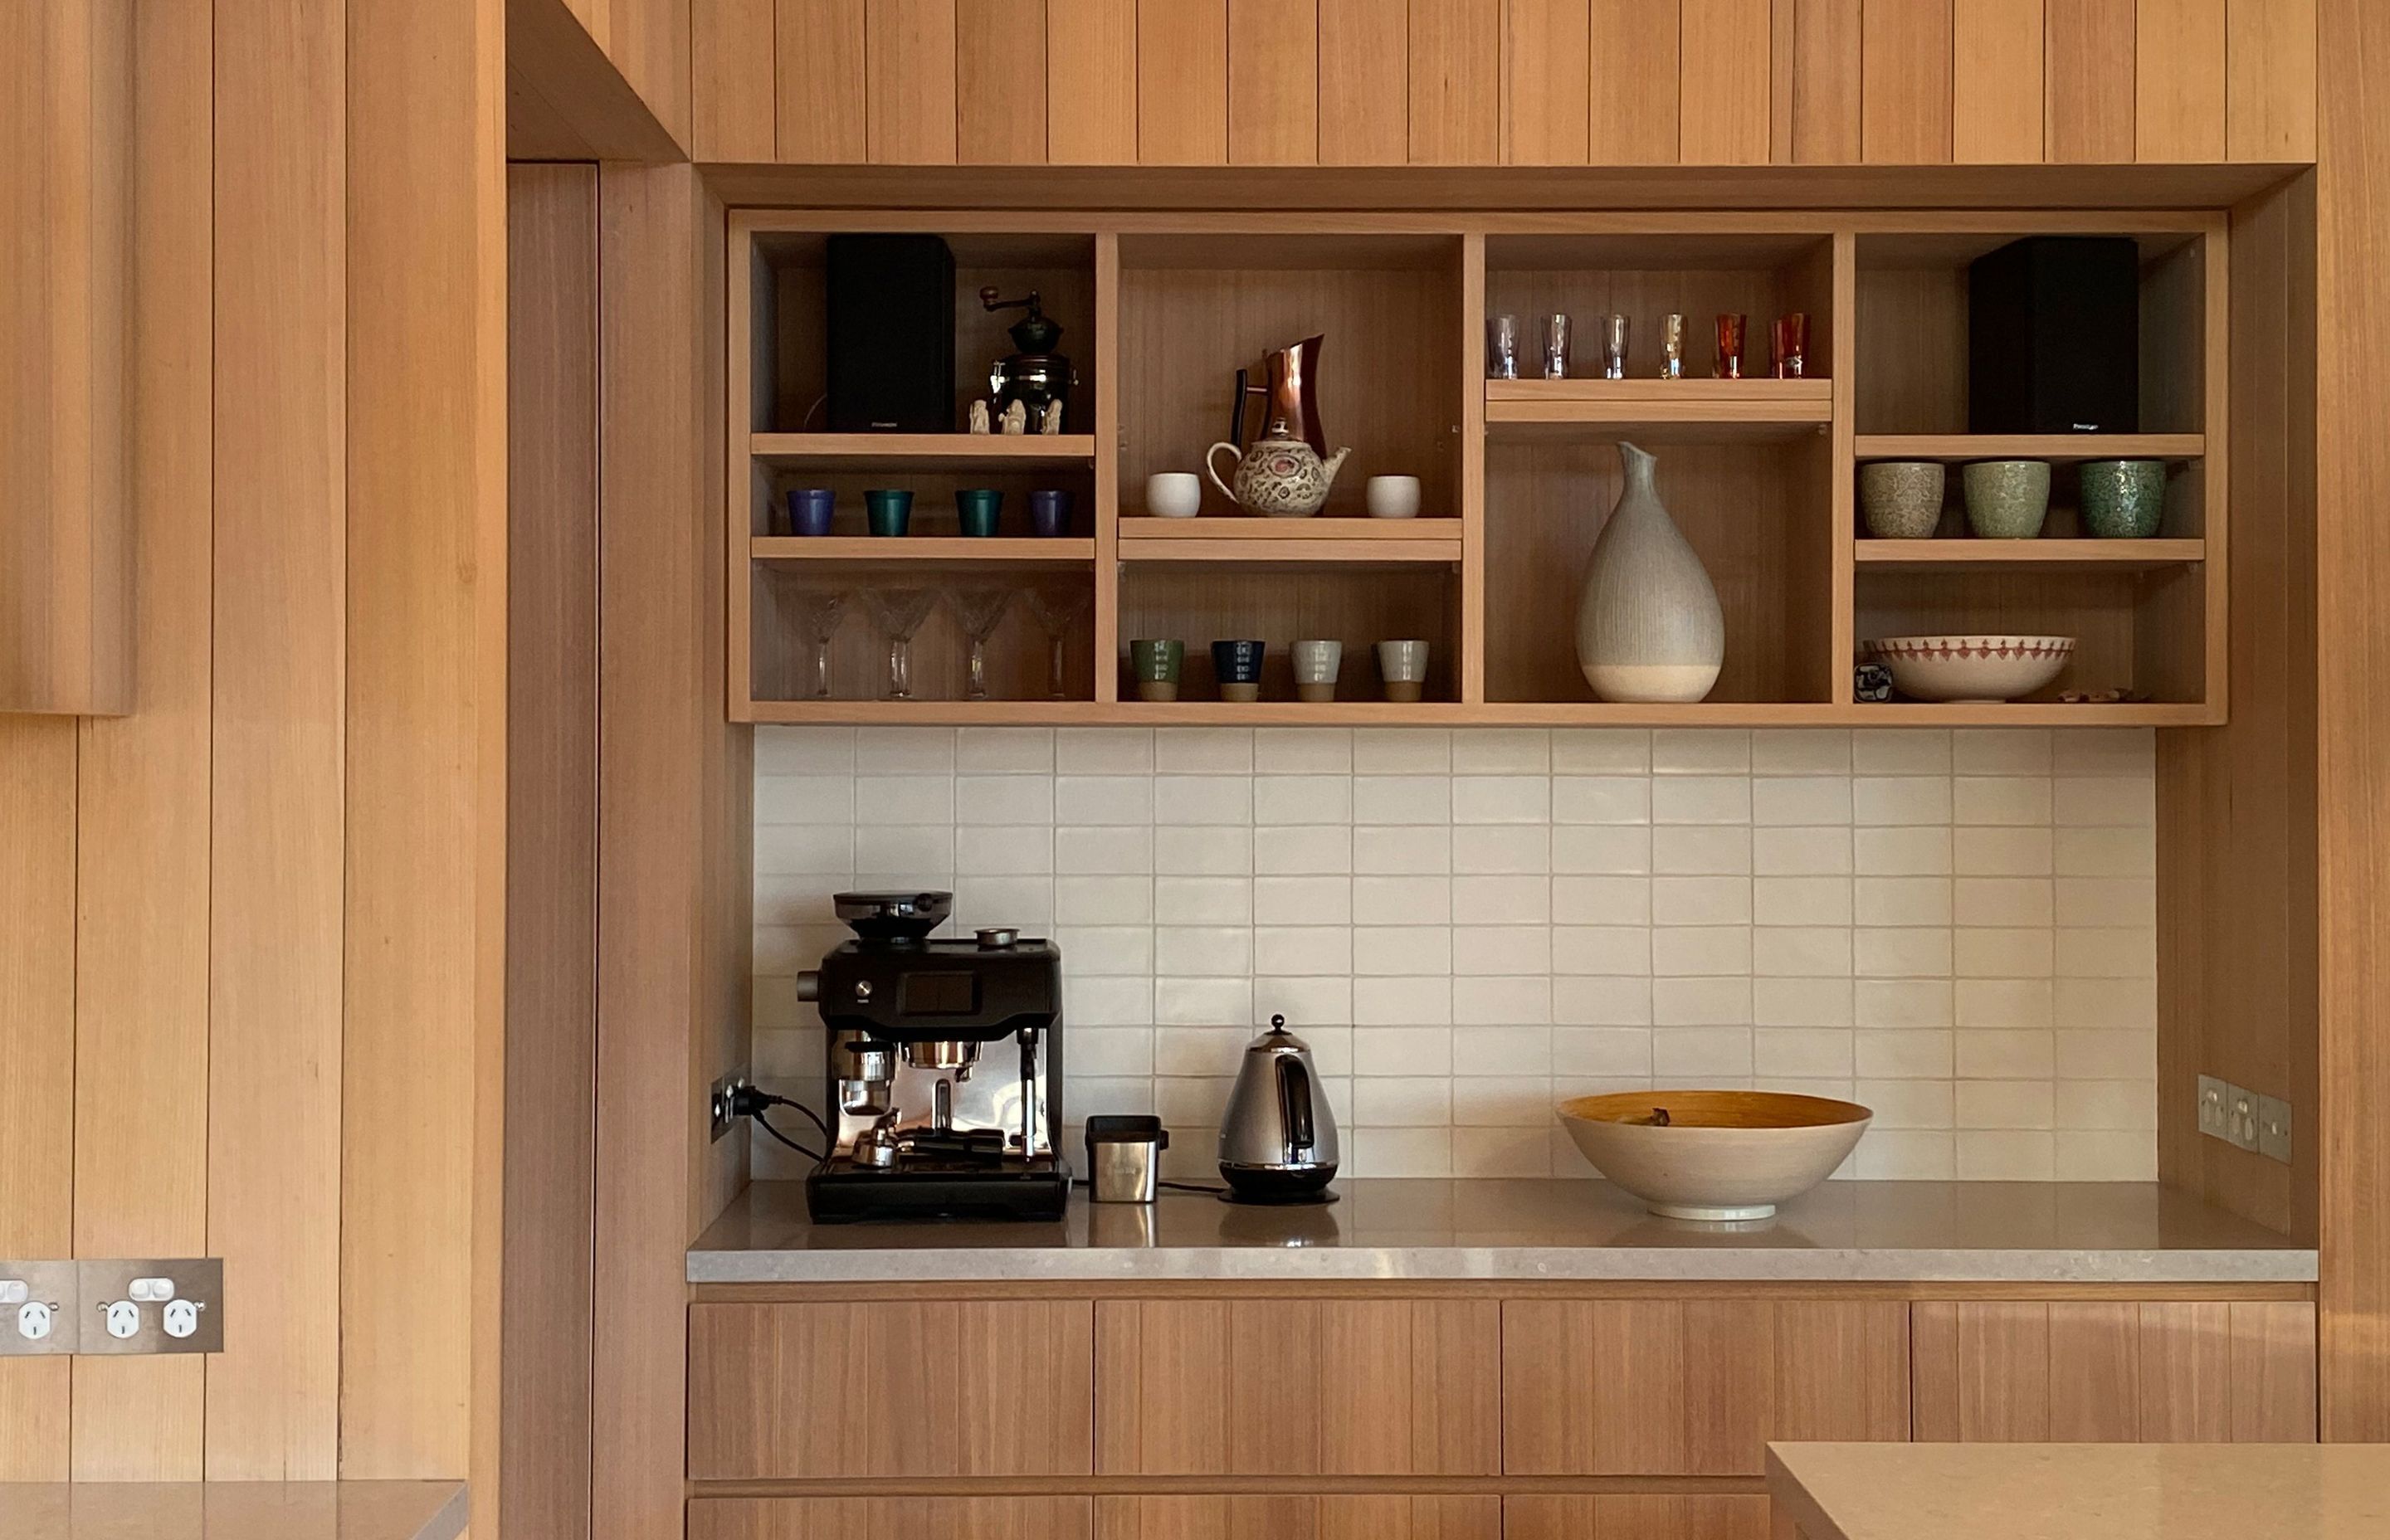 An extension of the kitchen, providing additional bench space and storage. | Photographer: Ruth Whitaker